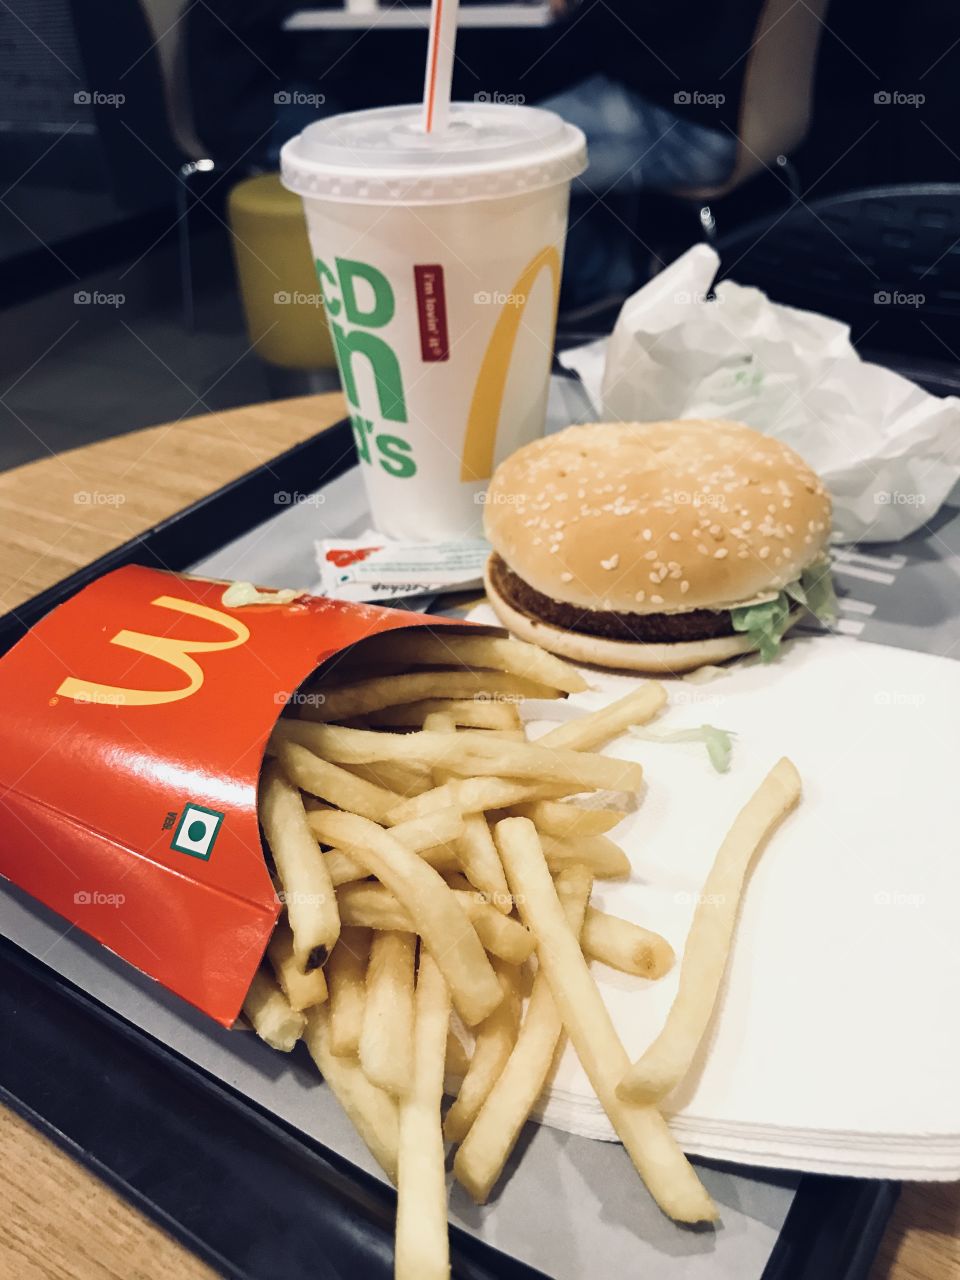 There is my favourite fries burger and cold drink!!!!